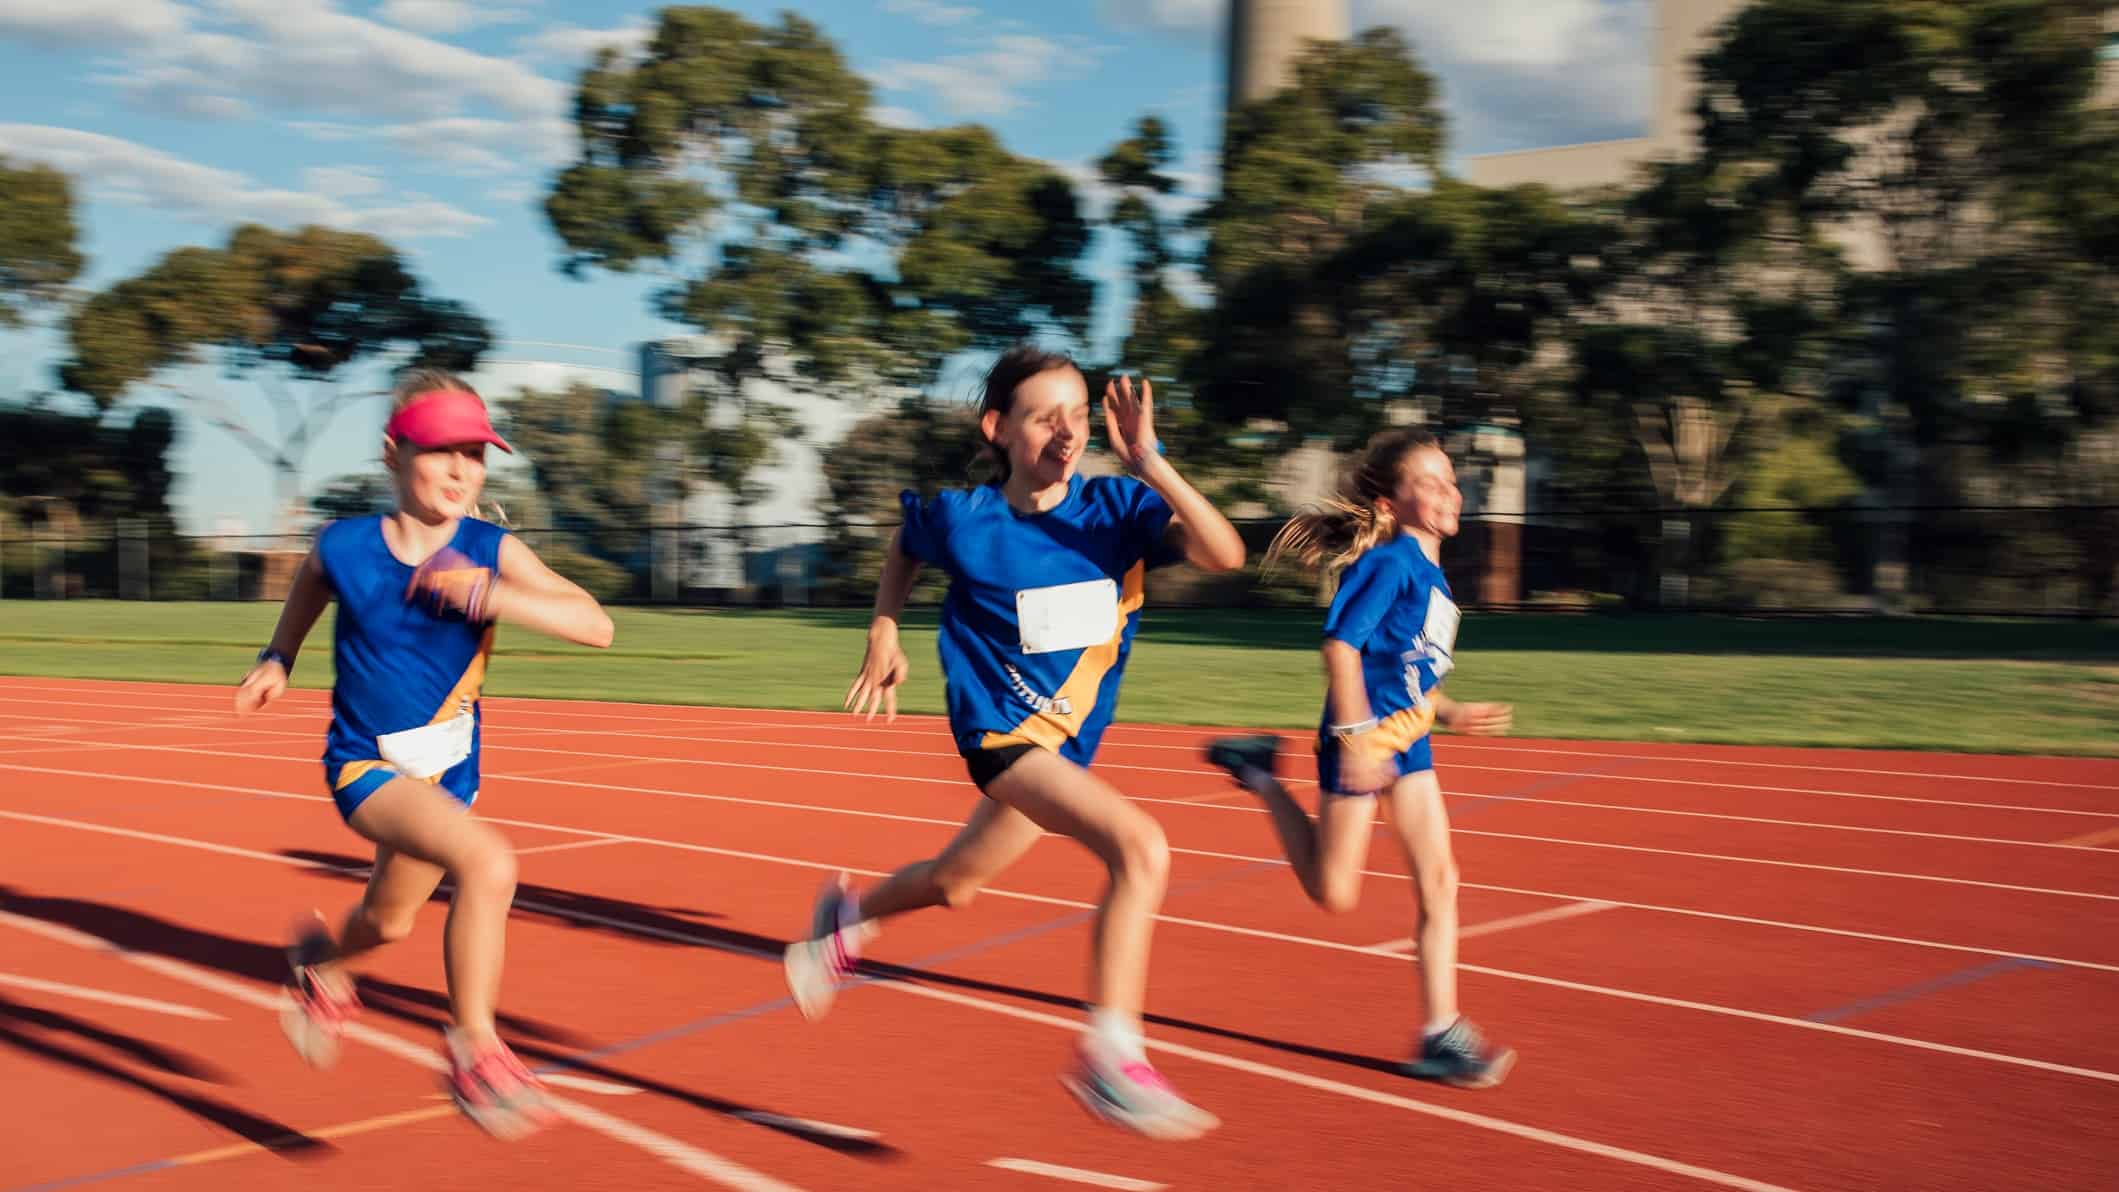 Three girls compete in a race, running fast around an athletic track.